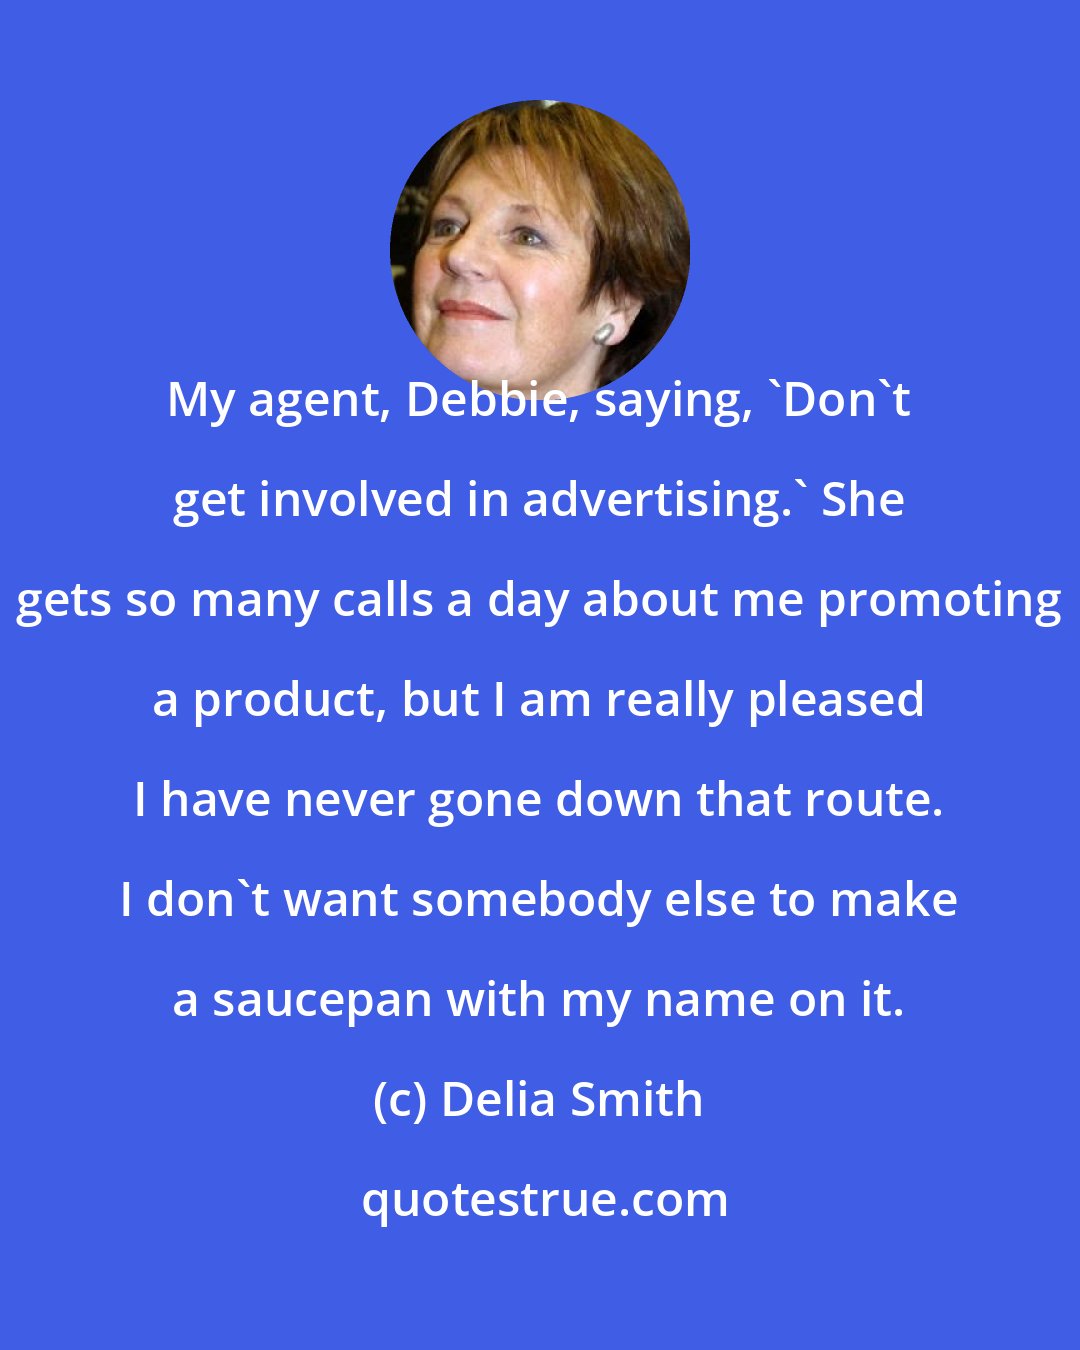 Delia Smith: My agent, Debbie, saying, 'Don't get involved in advertising.' She gets so many calls a day about me promoting a product, but I am really pleased I have never gone down that route. I don't want somebody else to make a saucepan with my name on it.